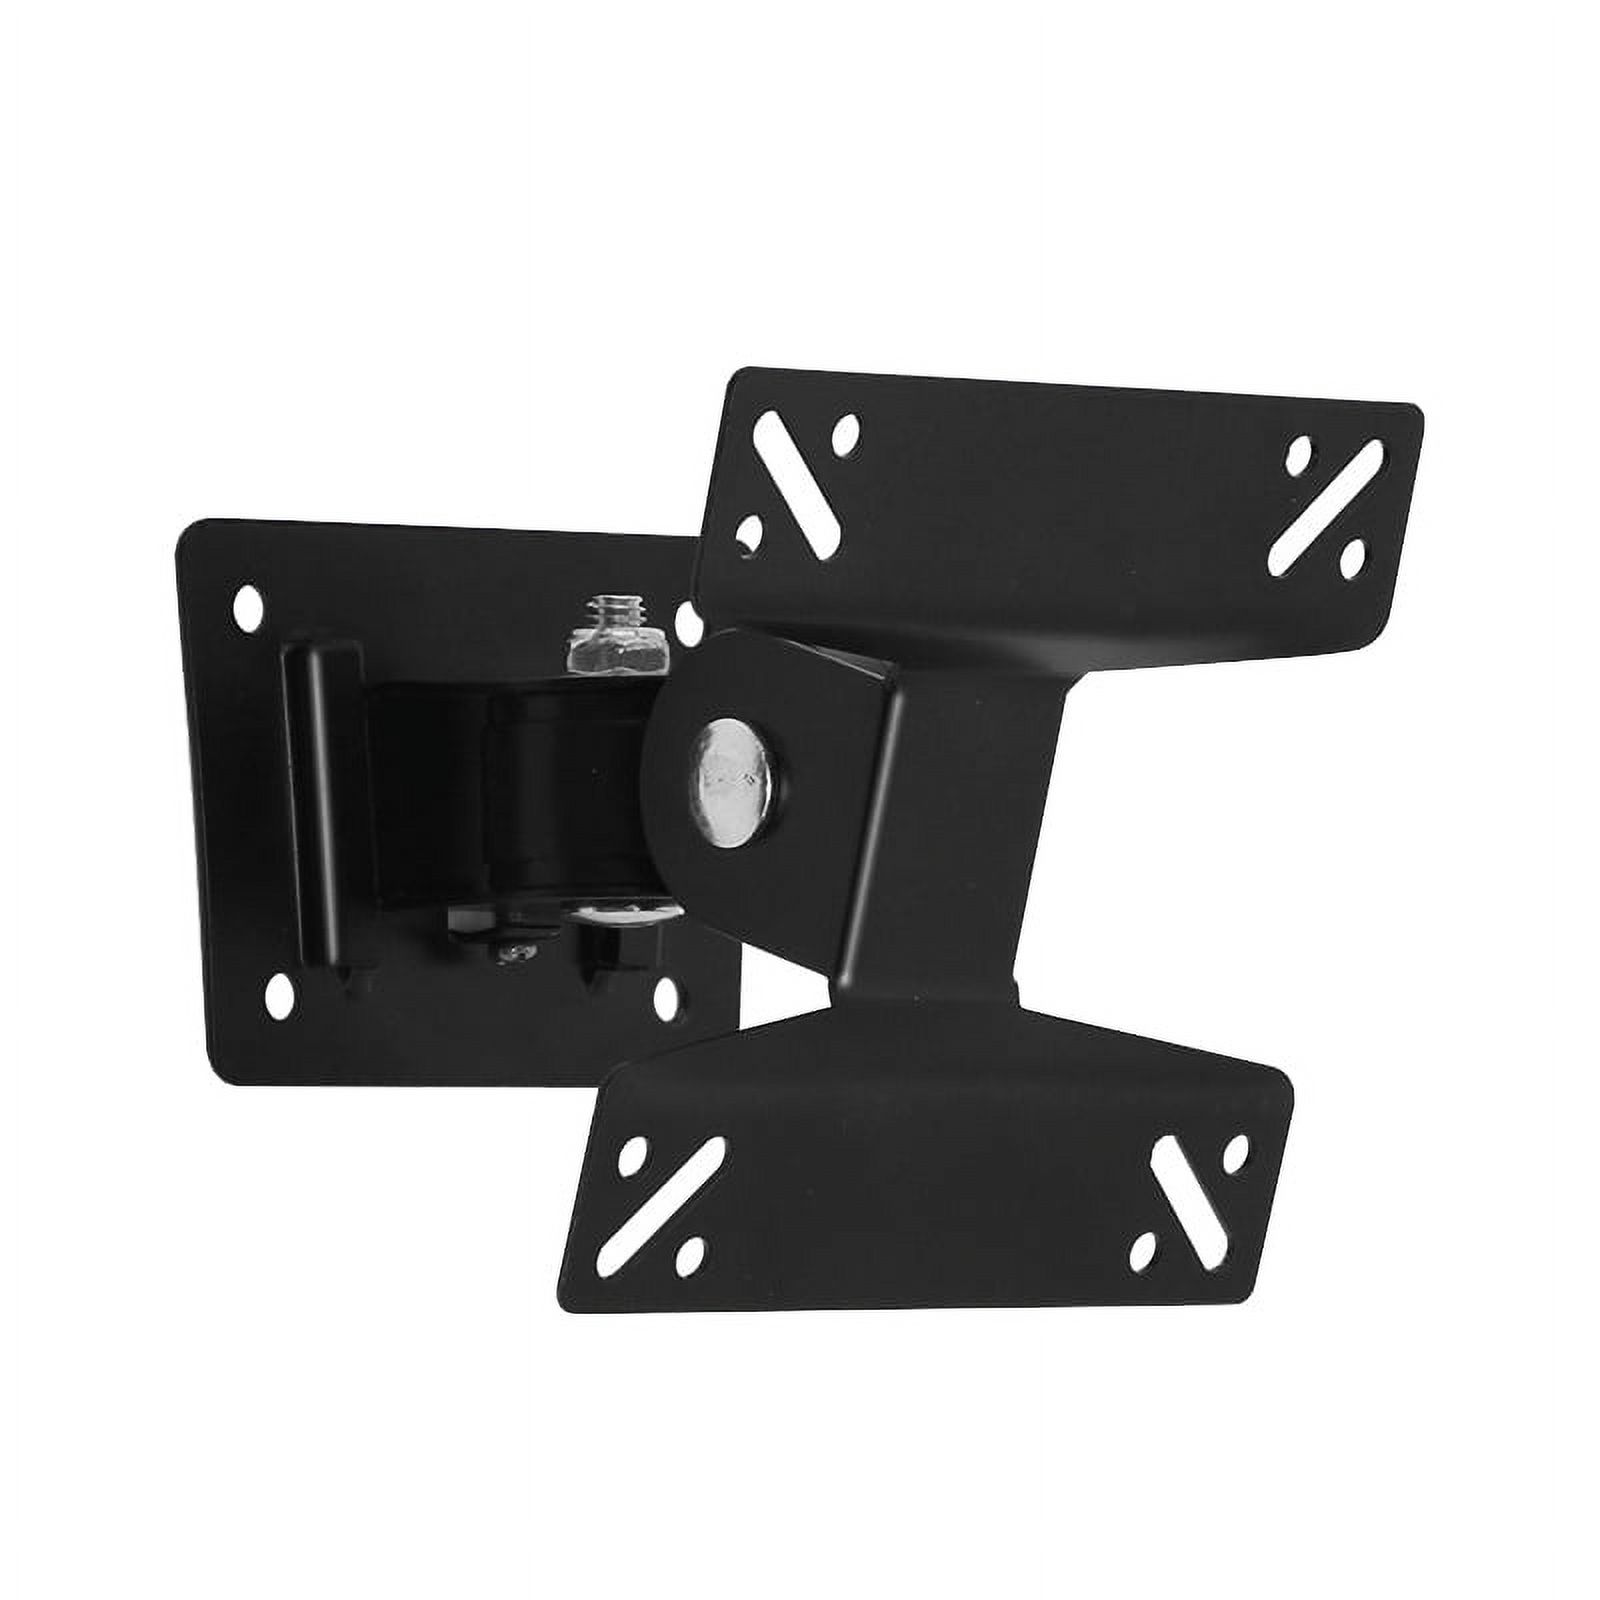 Universal Wall Mount Stand for 15-27inch LCD LED Screen Height Adjustable Monitor Retractable Wall for Tv Bracket - image 1 of 4